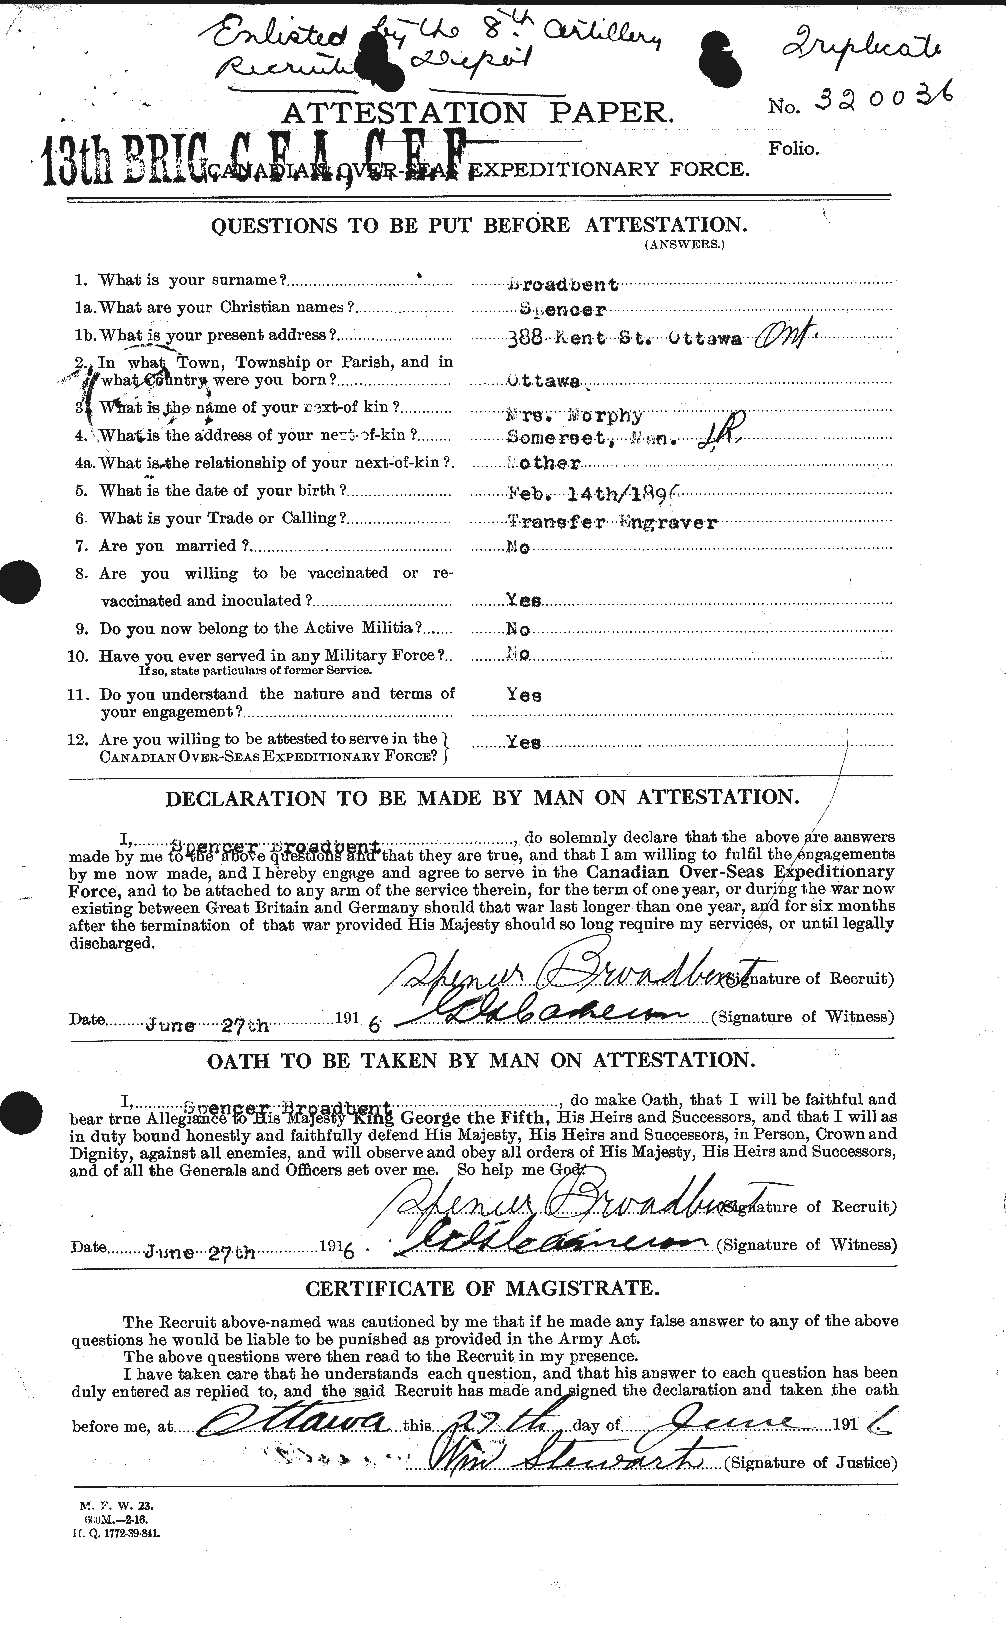 Personnel Records of the First World War - CEF 262975a